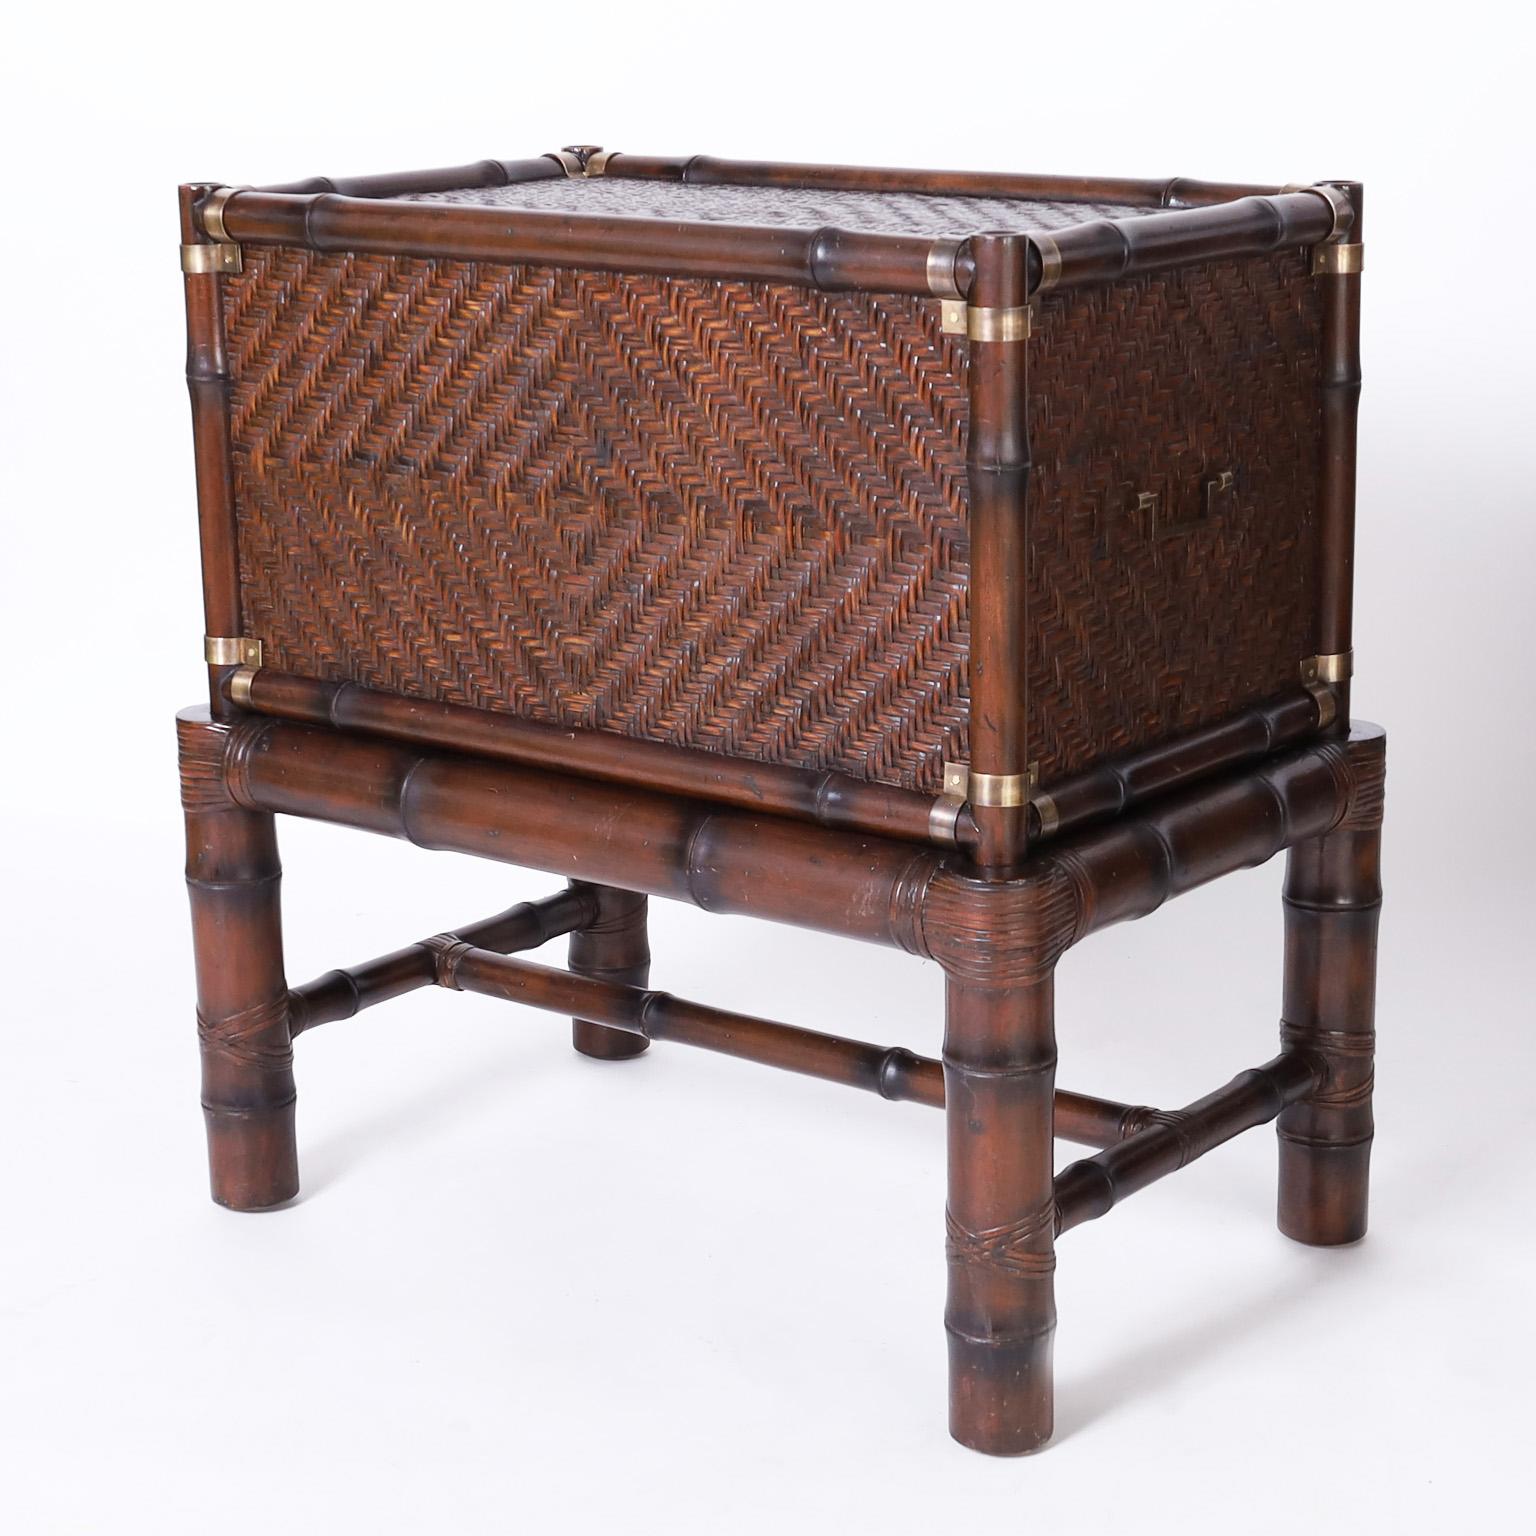 American Pair of British Colonial Style Chests on Bamboo Stands by Ralph Lauren